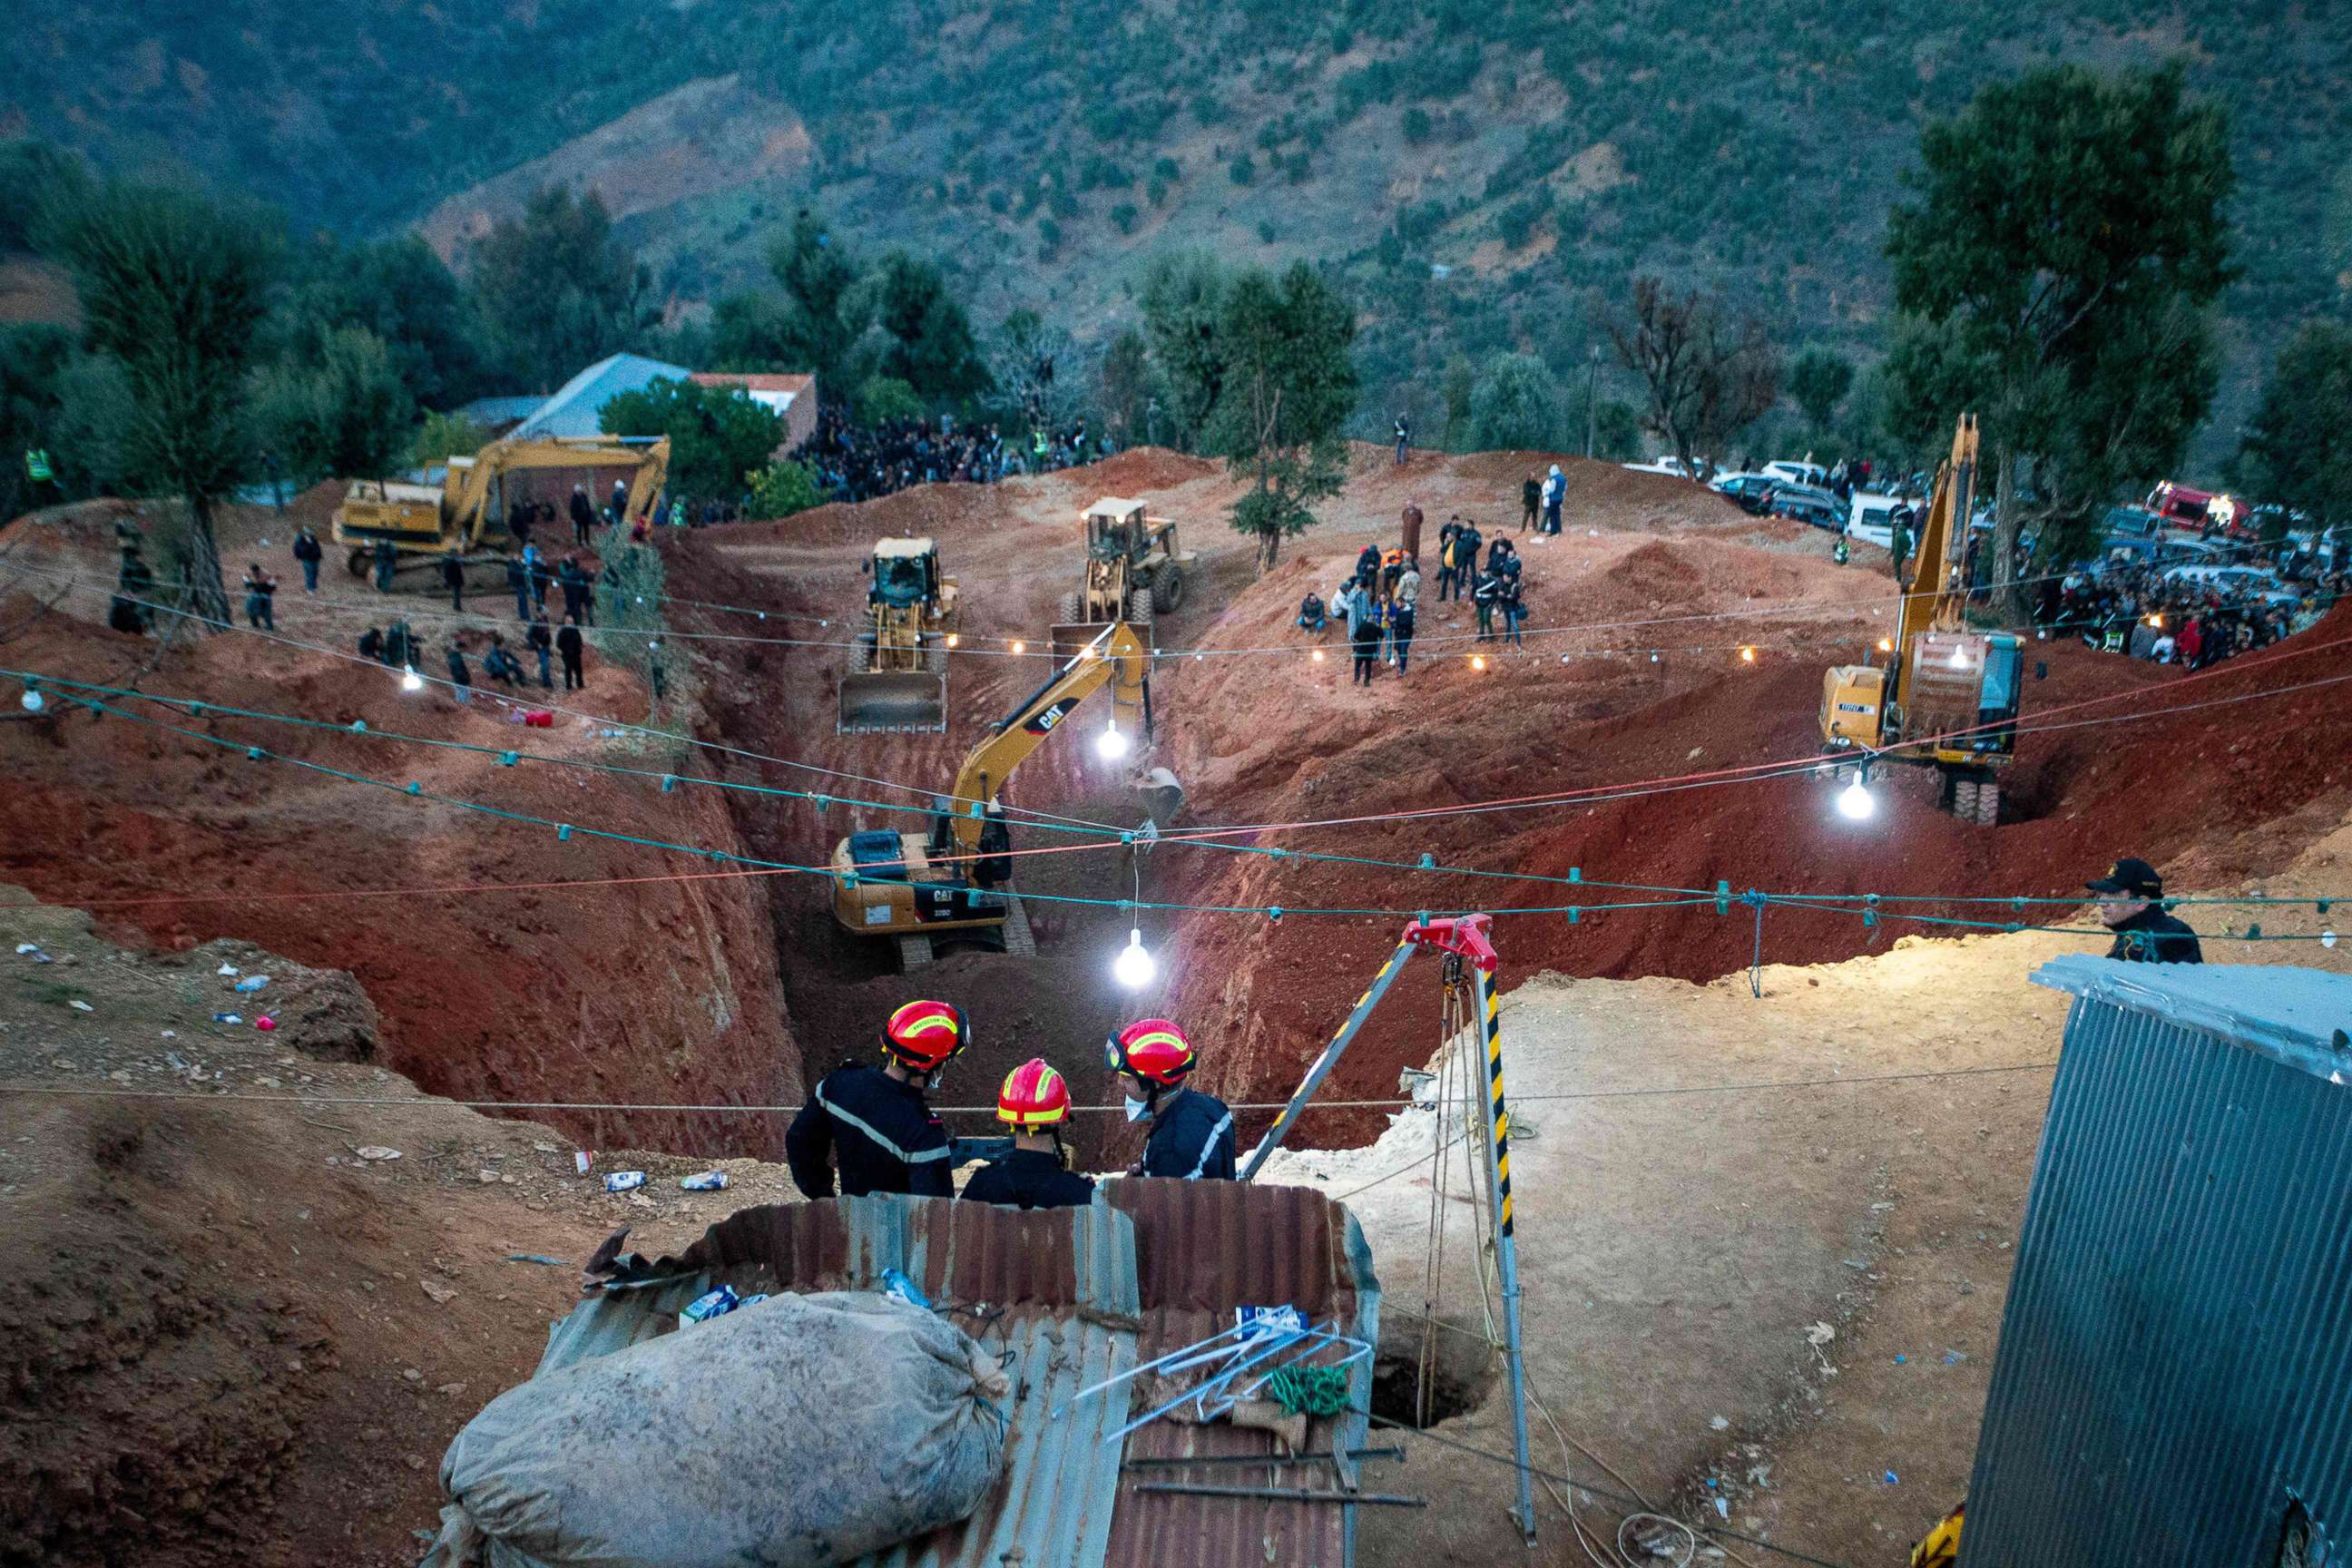 PHOTO: Moroccan authorities and firefighters work to rescue a five-year-old boy named Rayan, who fell into a deep well two days prior, near Bab Berred in Morocco's rural northern province of Chefchaouen, Feb. 3, 2022.